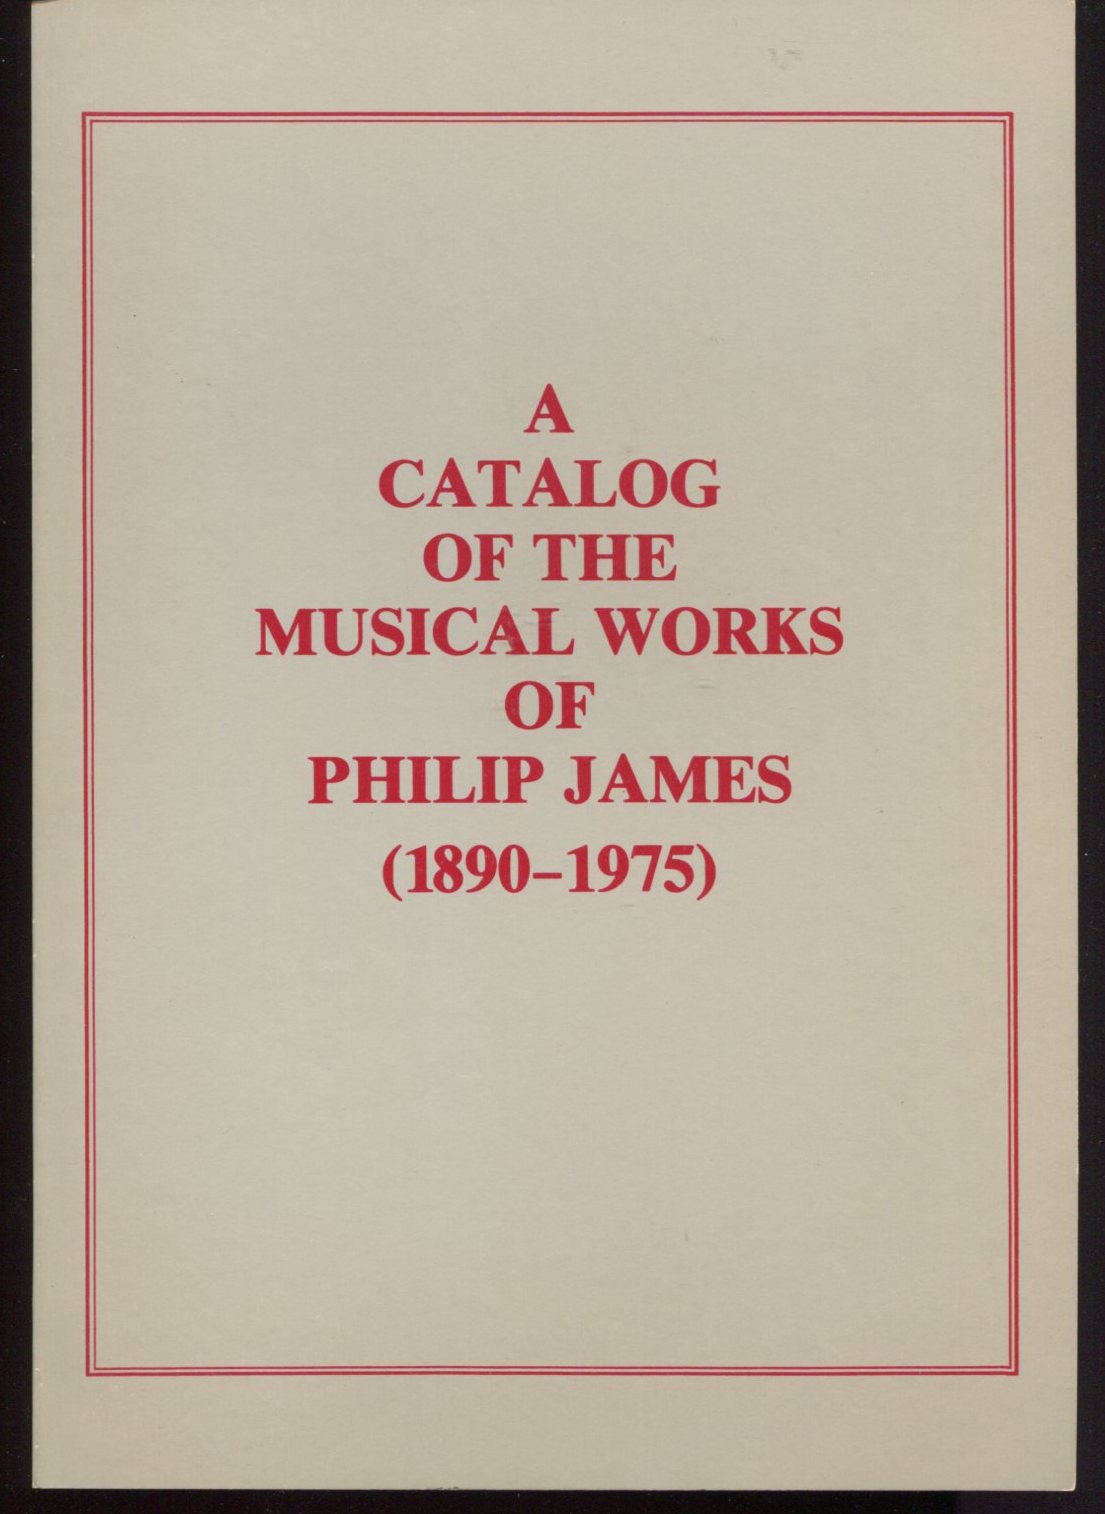 A Catalog of the Musical Works of Philip James (1890-1975).